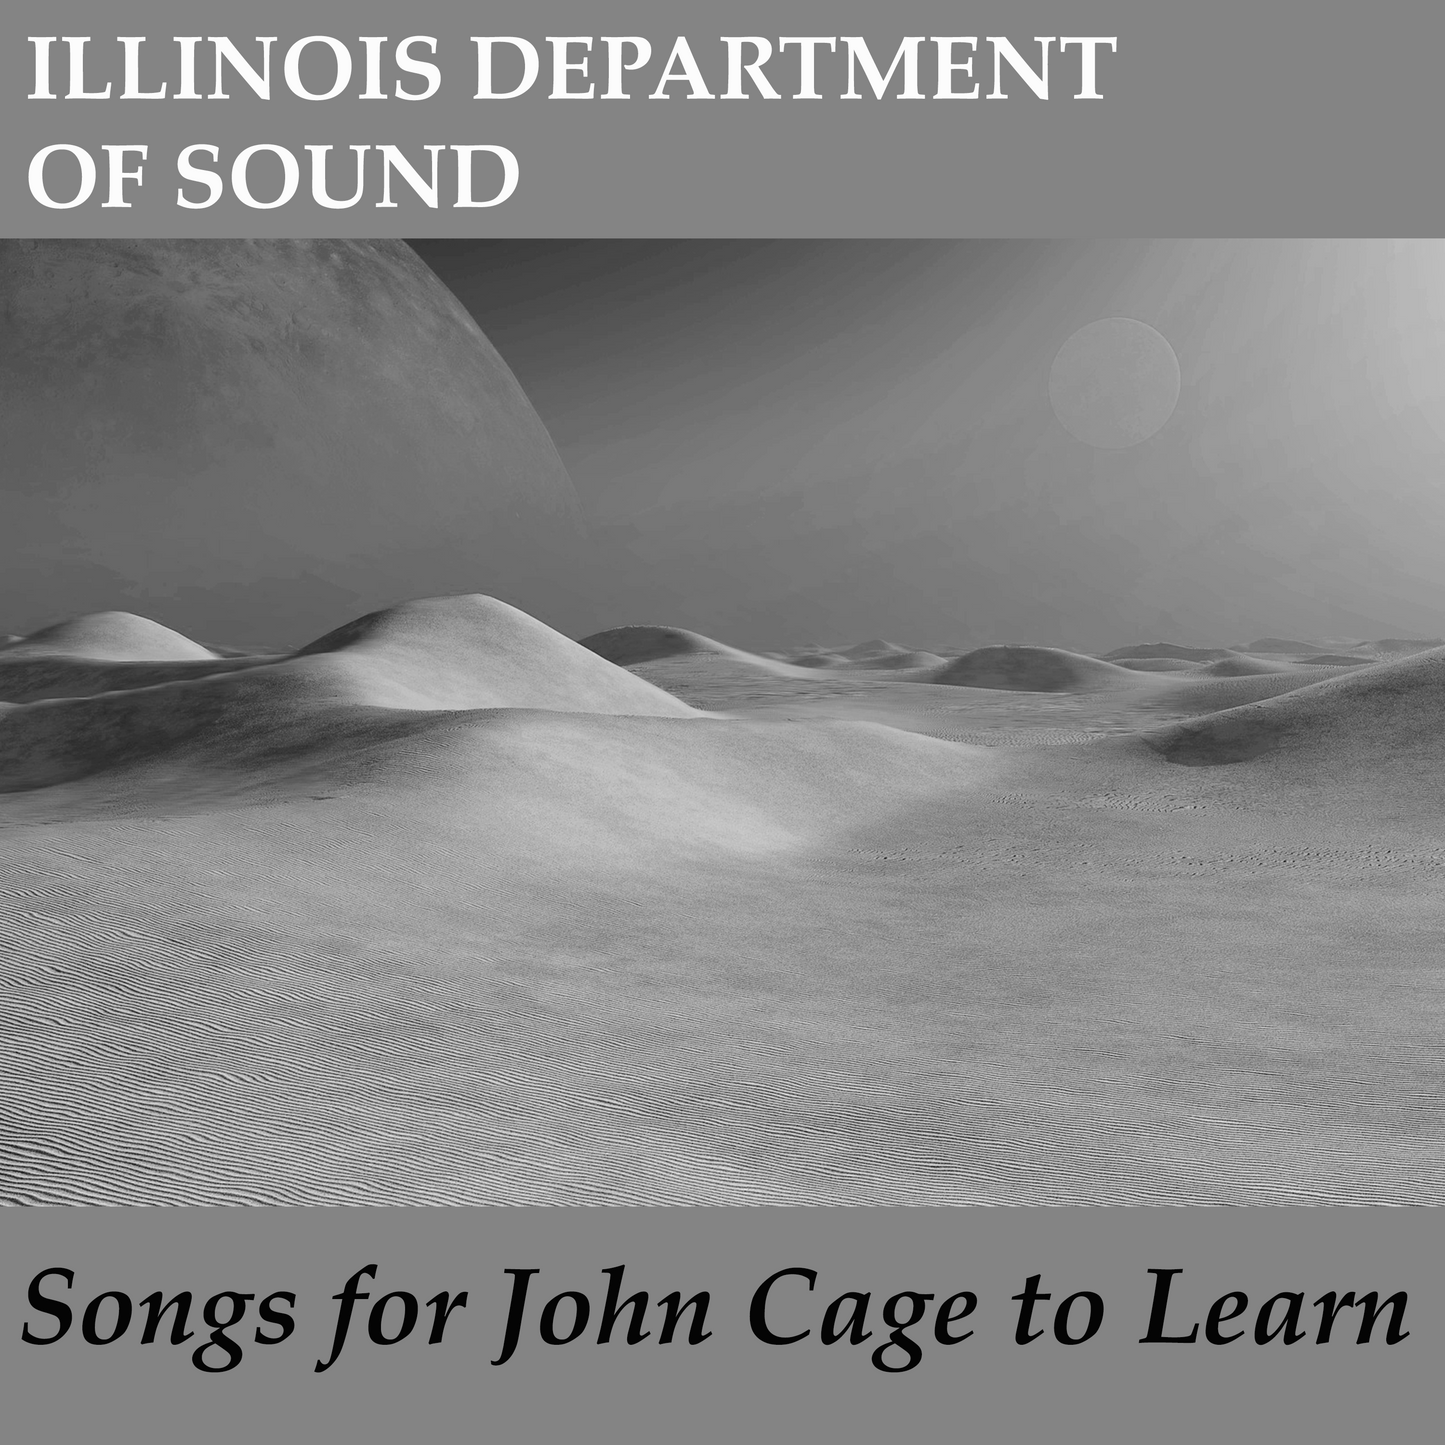 Illinois Department of Sound presents Music for John Cage to Learn high quality .mp3 album download